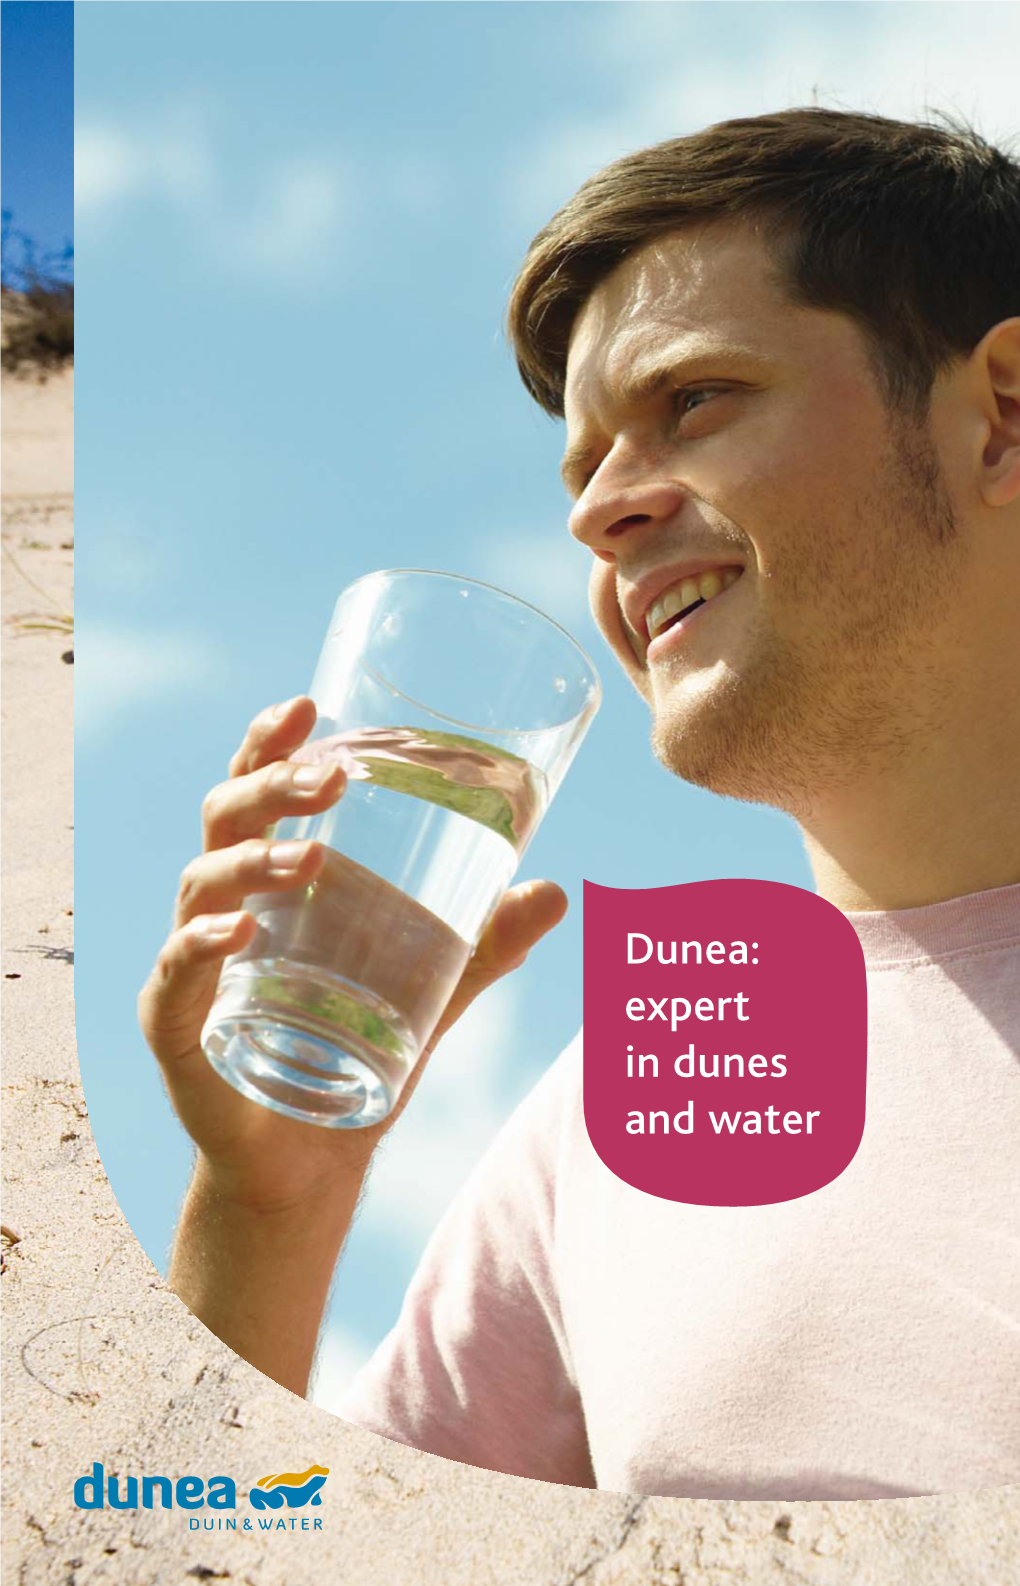 Dunea Stands for Drinking Water and Nature Conservancy